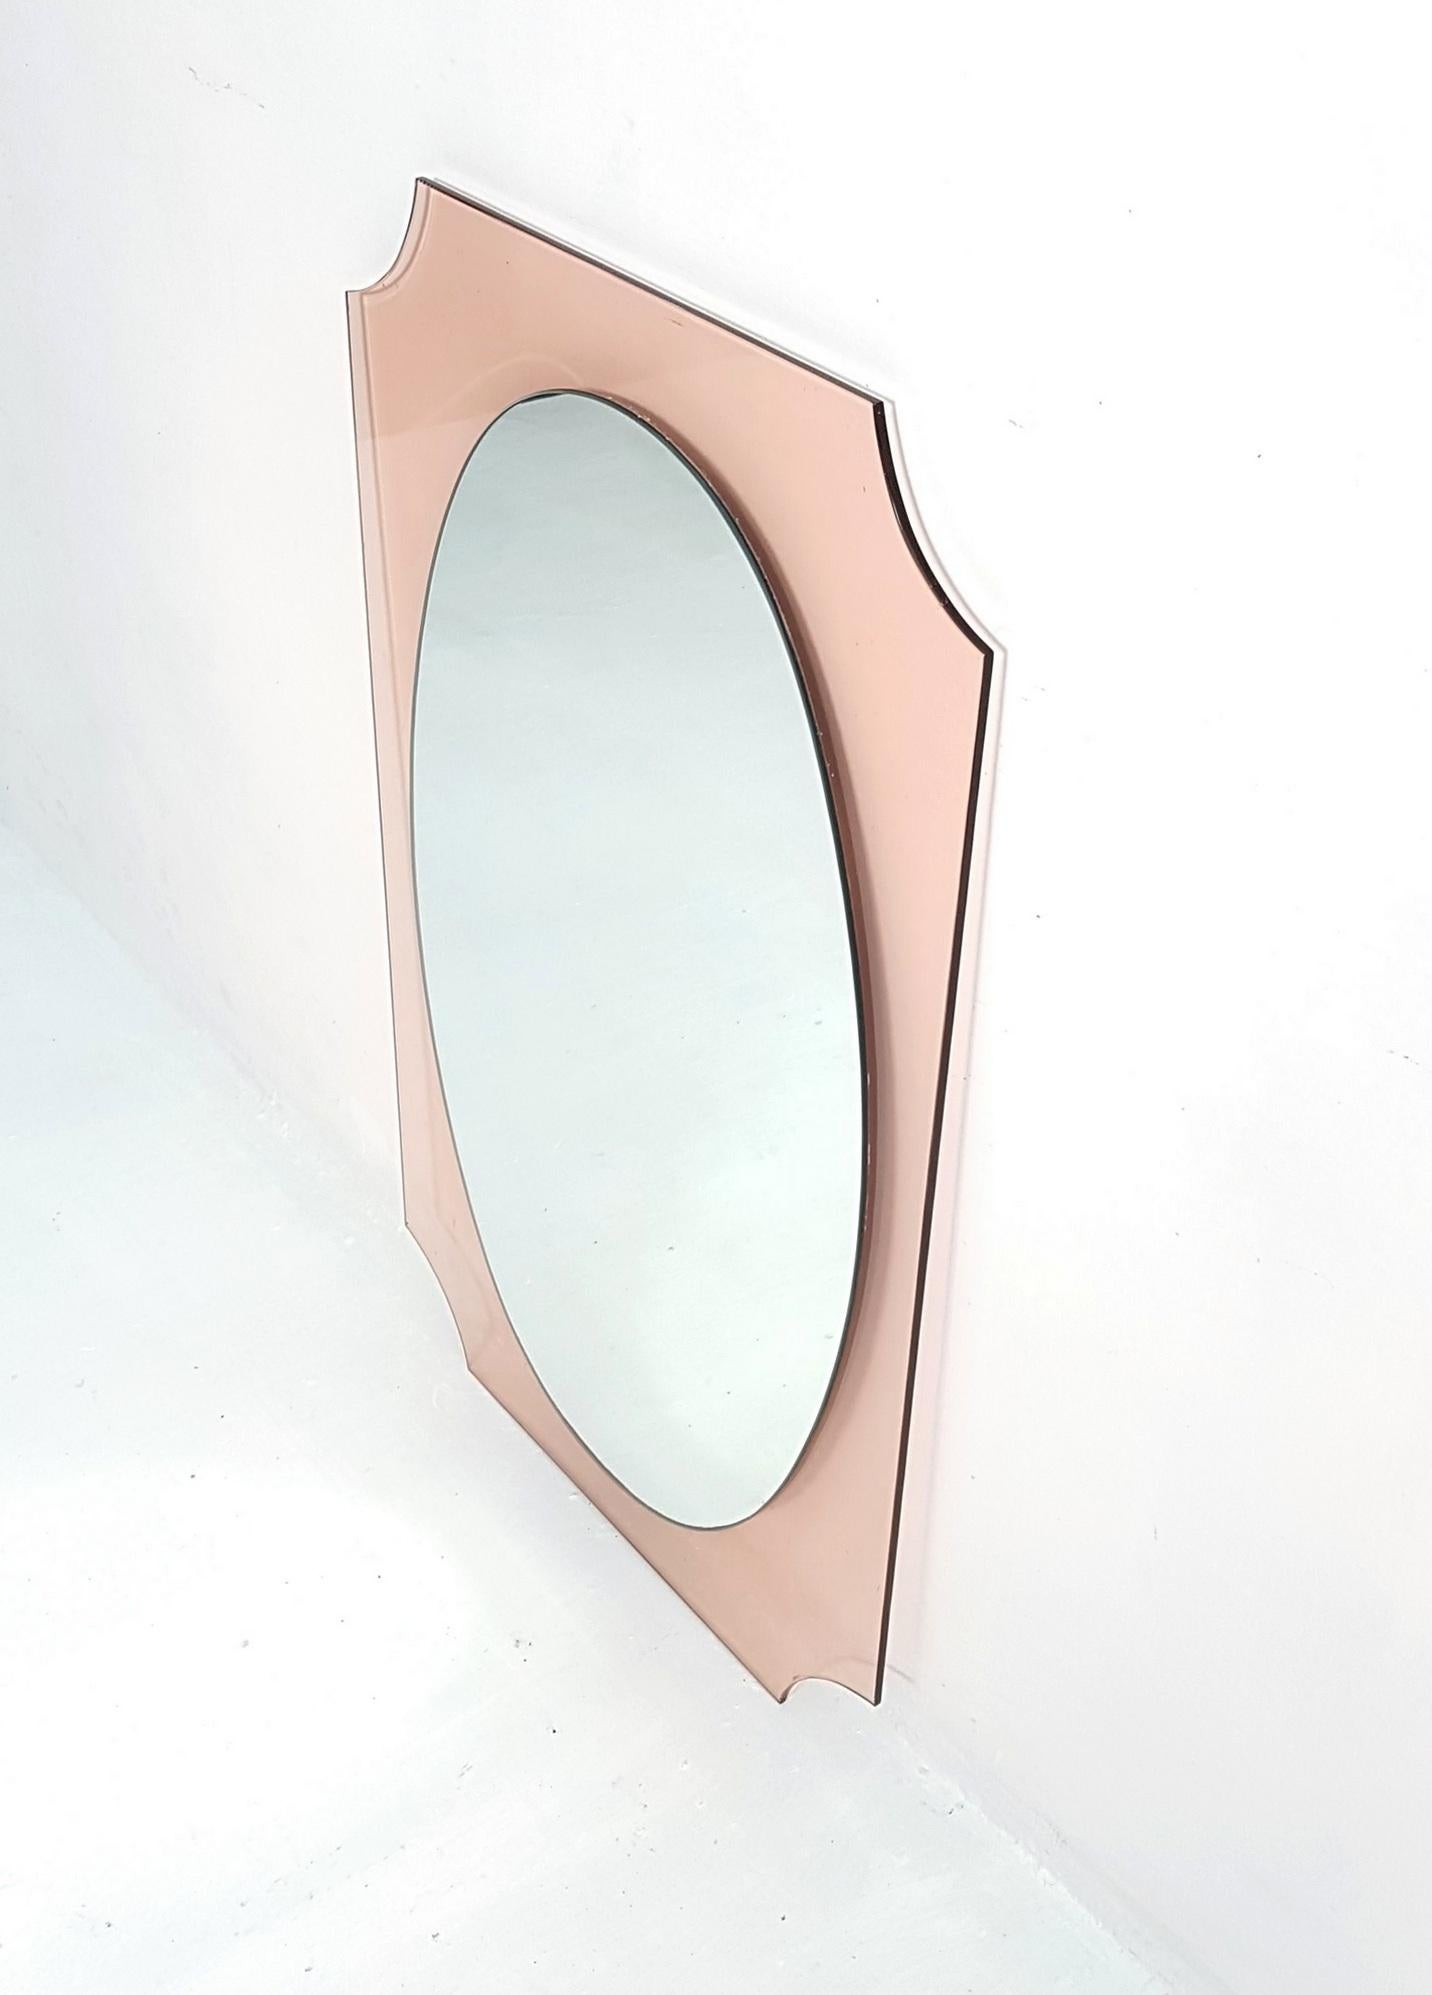 Italian wall mirror with an oval shape sitting on top of a backing of a square Smokey amber/pink colored Lucite with rounded corners.